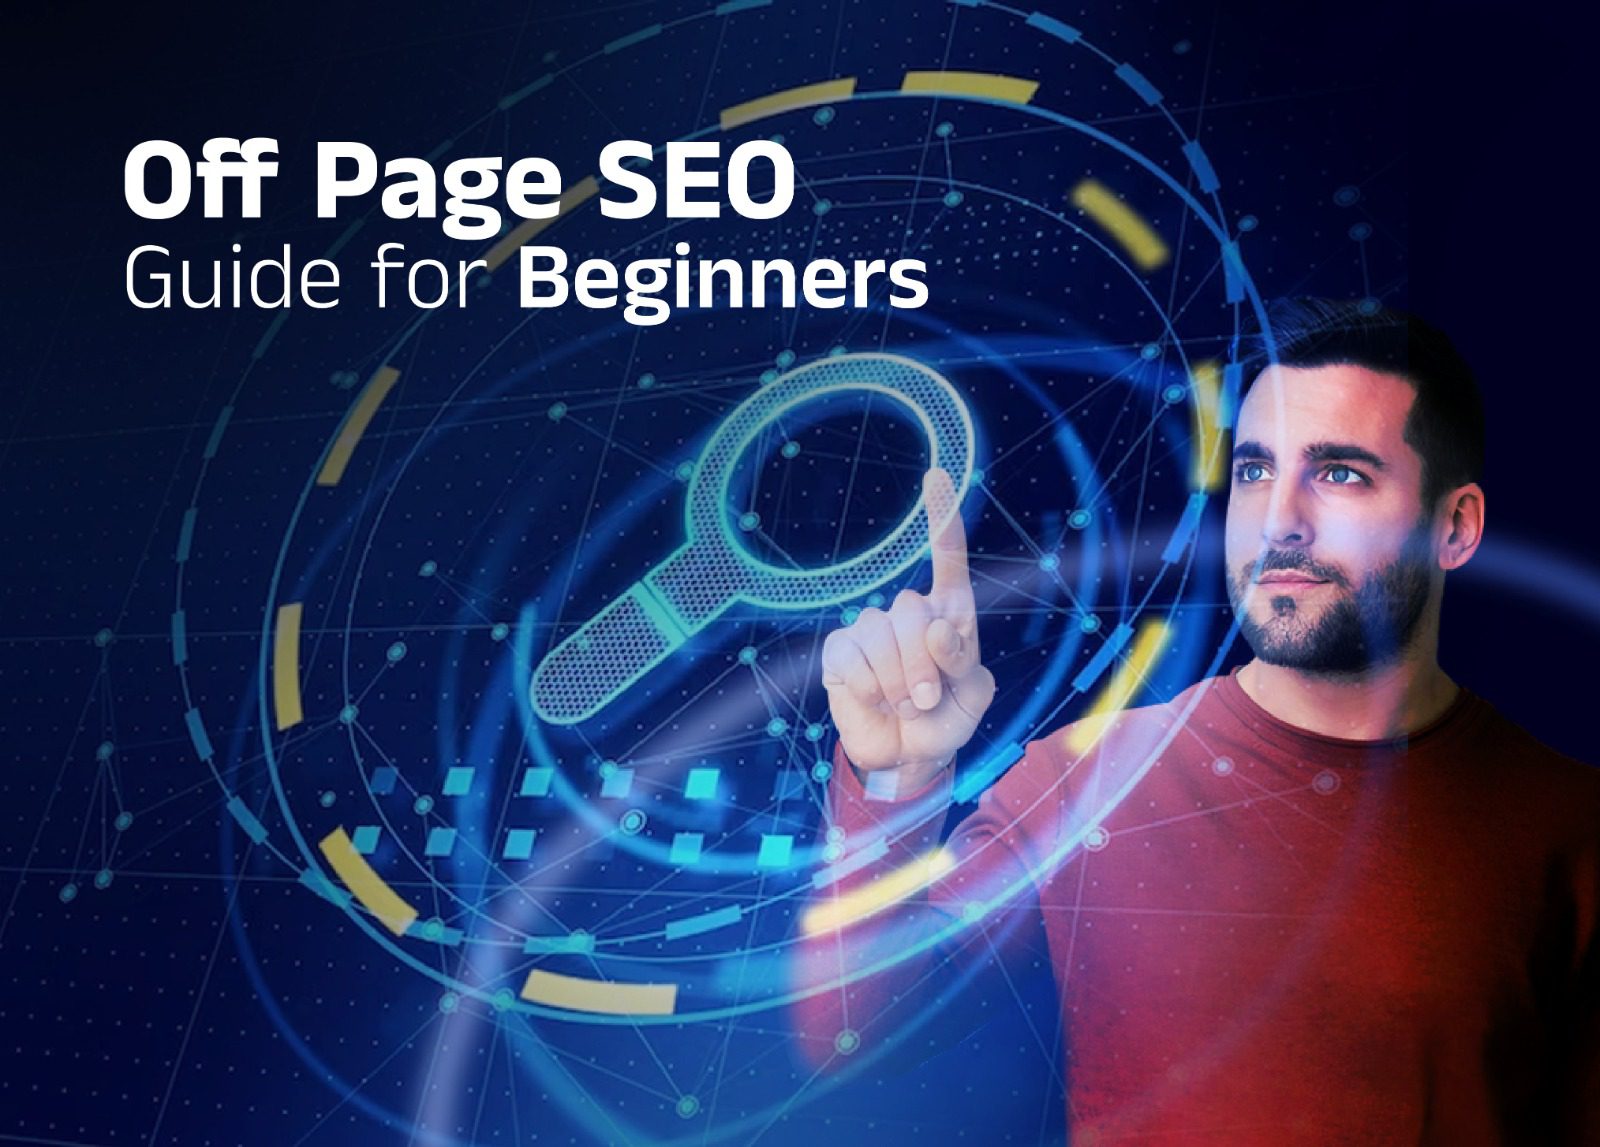 Off-Page SEO guide for beginners.